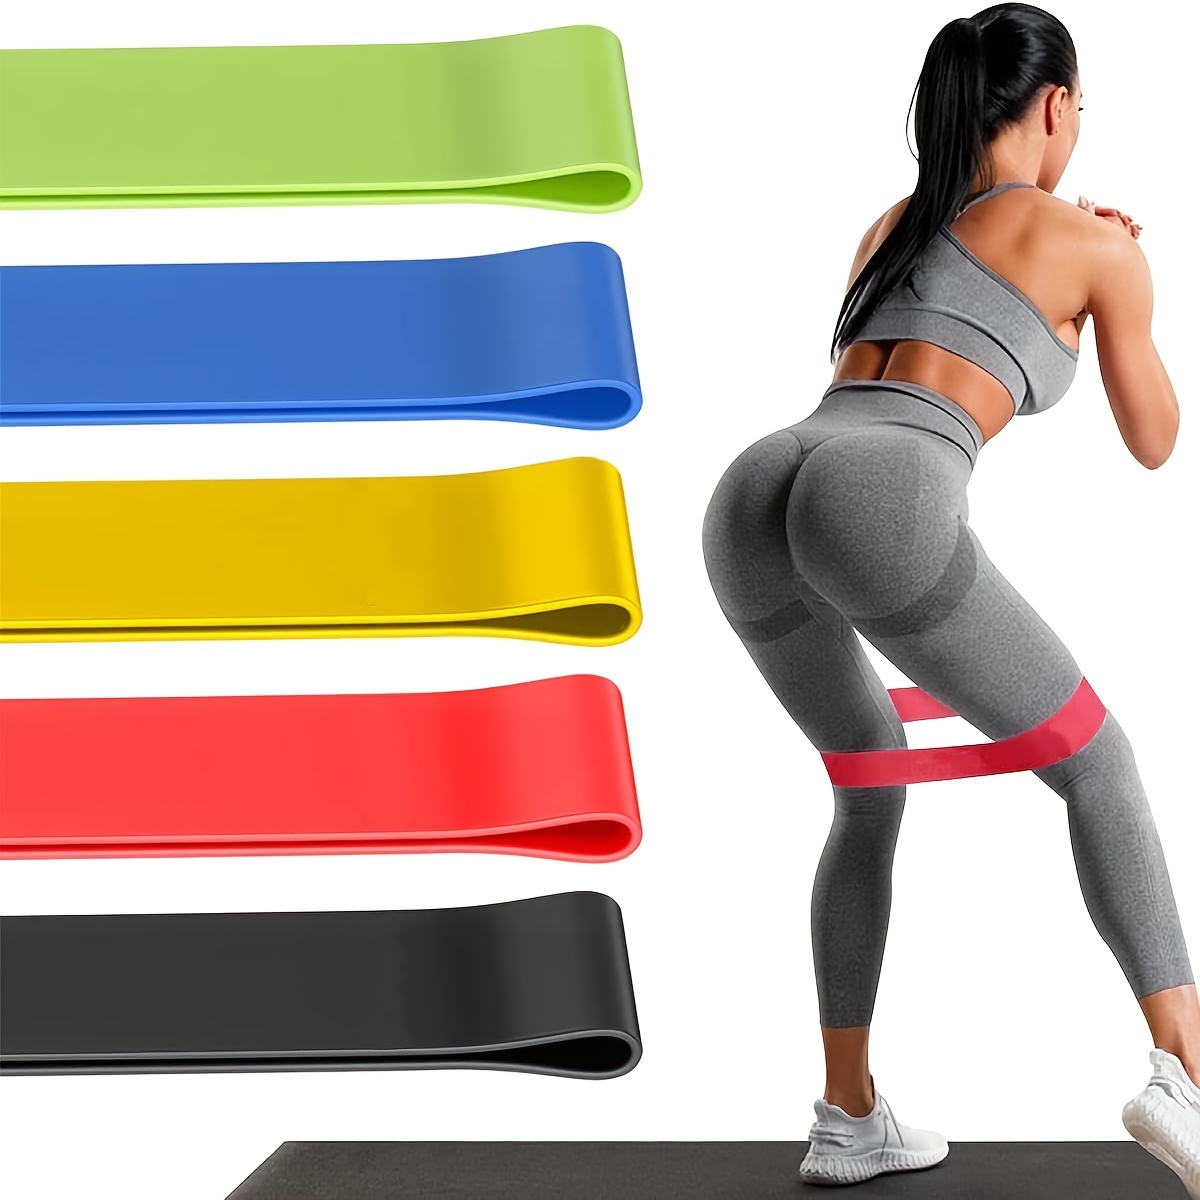 Yoga Stretch Band, Resistance Band, Workout Fitness Home For Gym